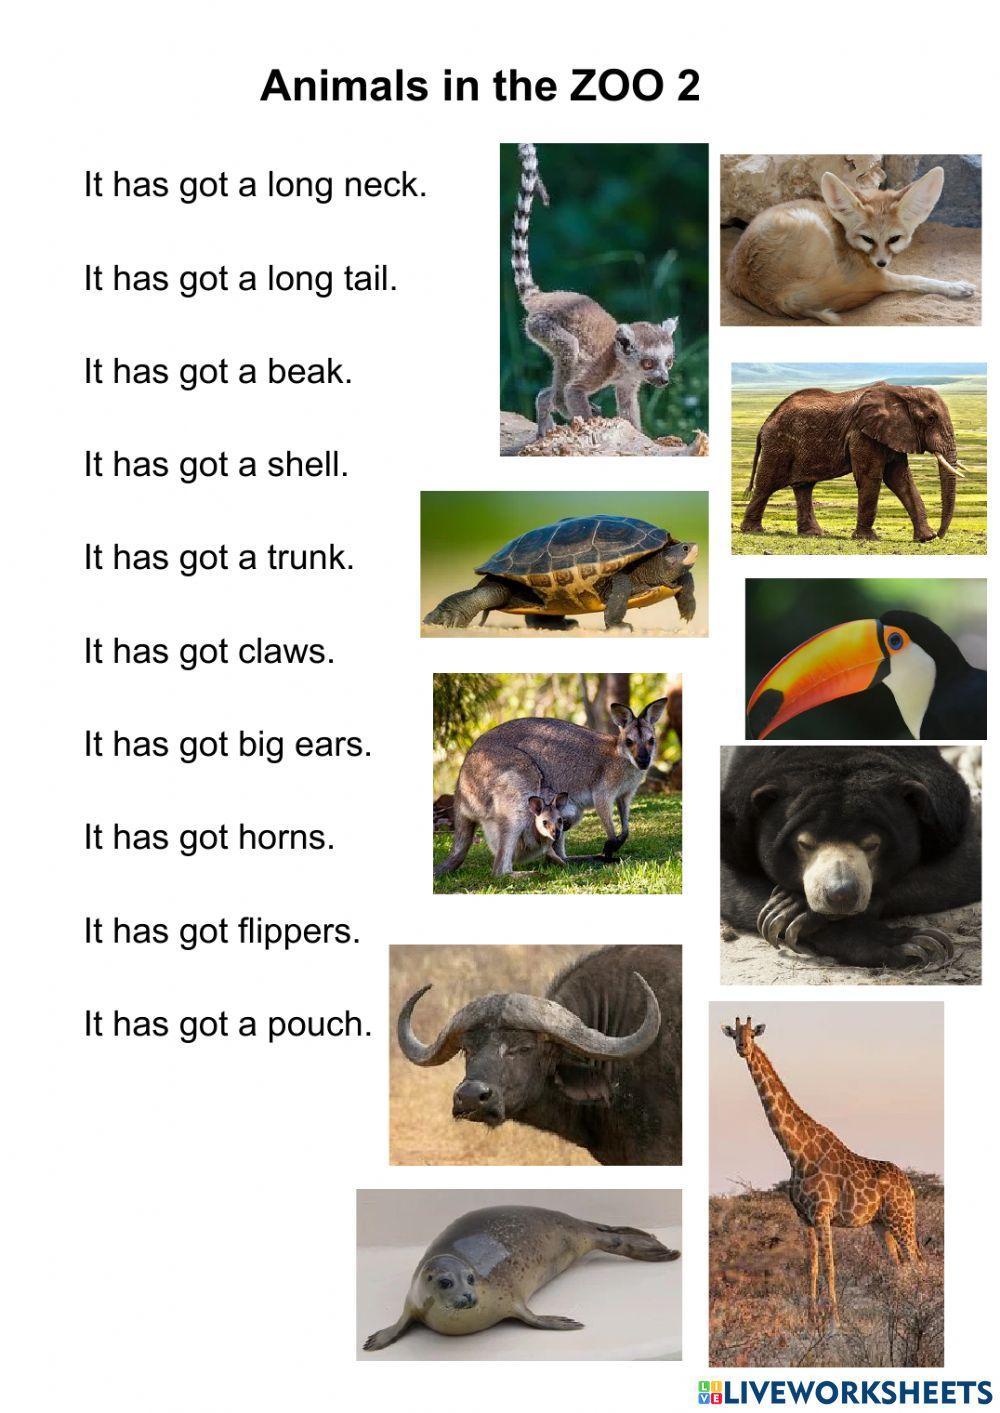 Animals in the zoo 2